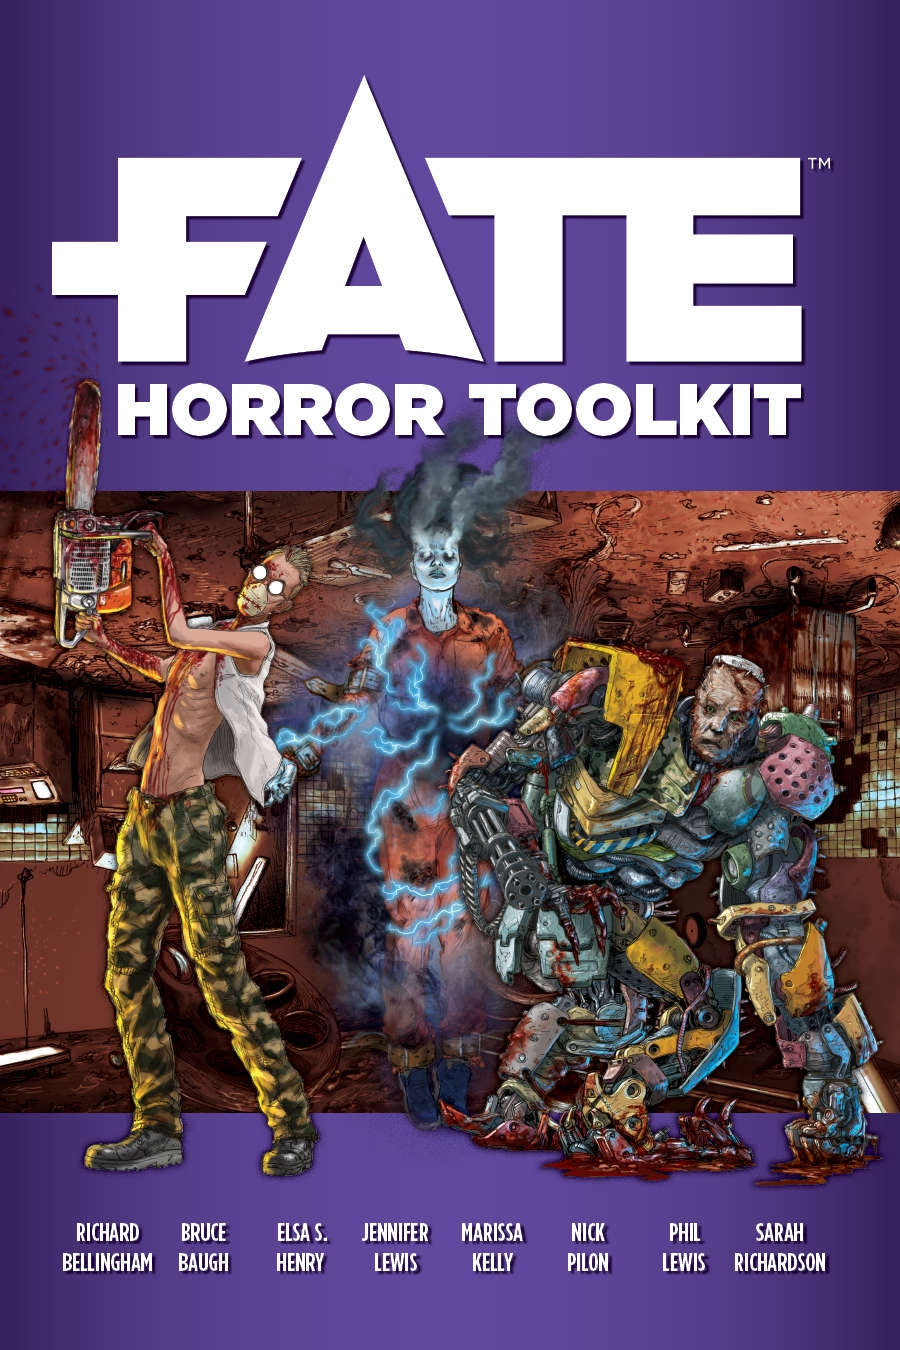 Horror Toolkit - Fate